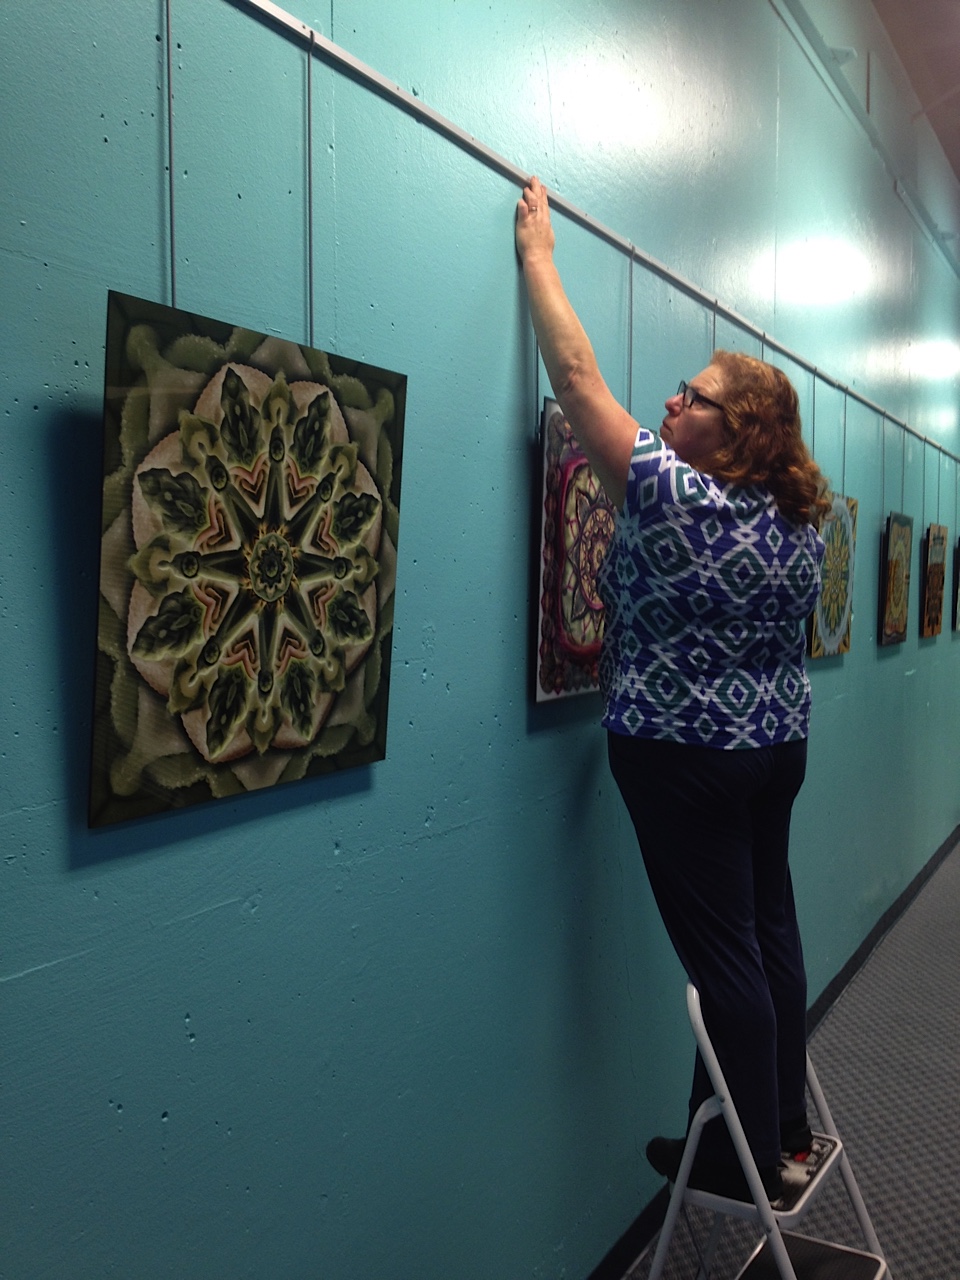 Hanging my work at the Federation